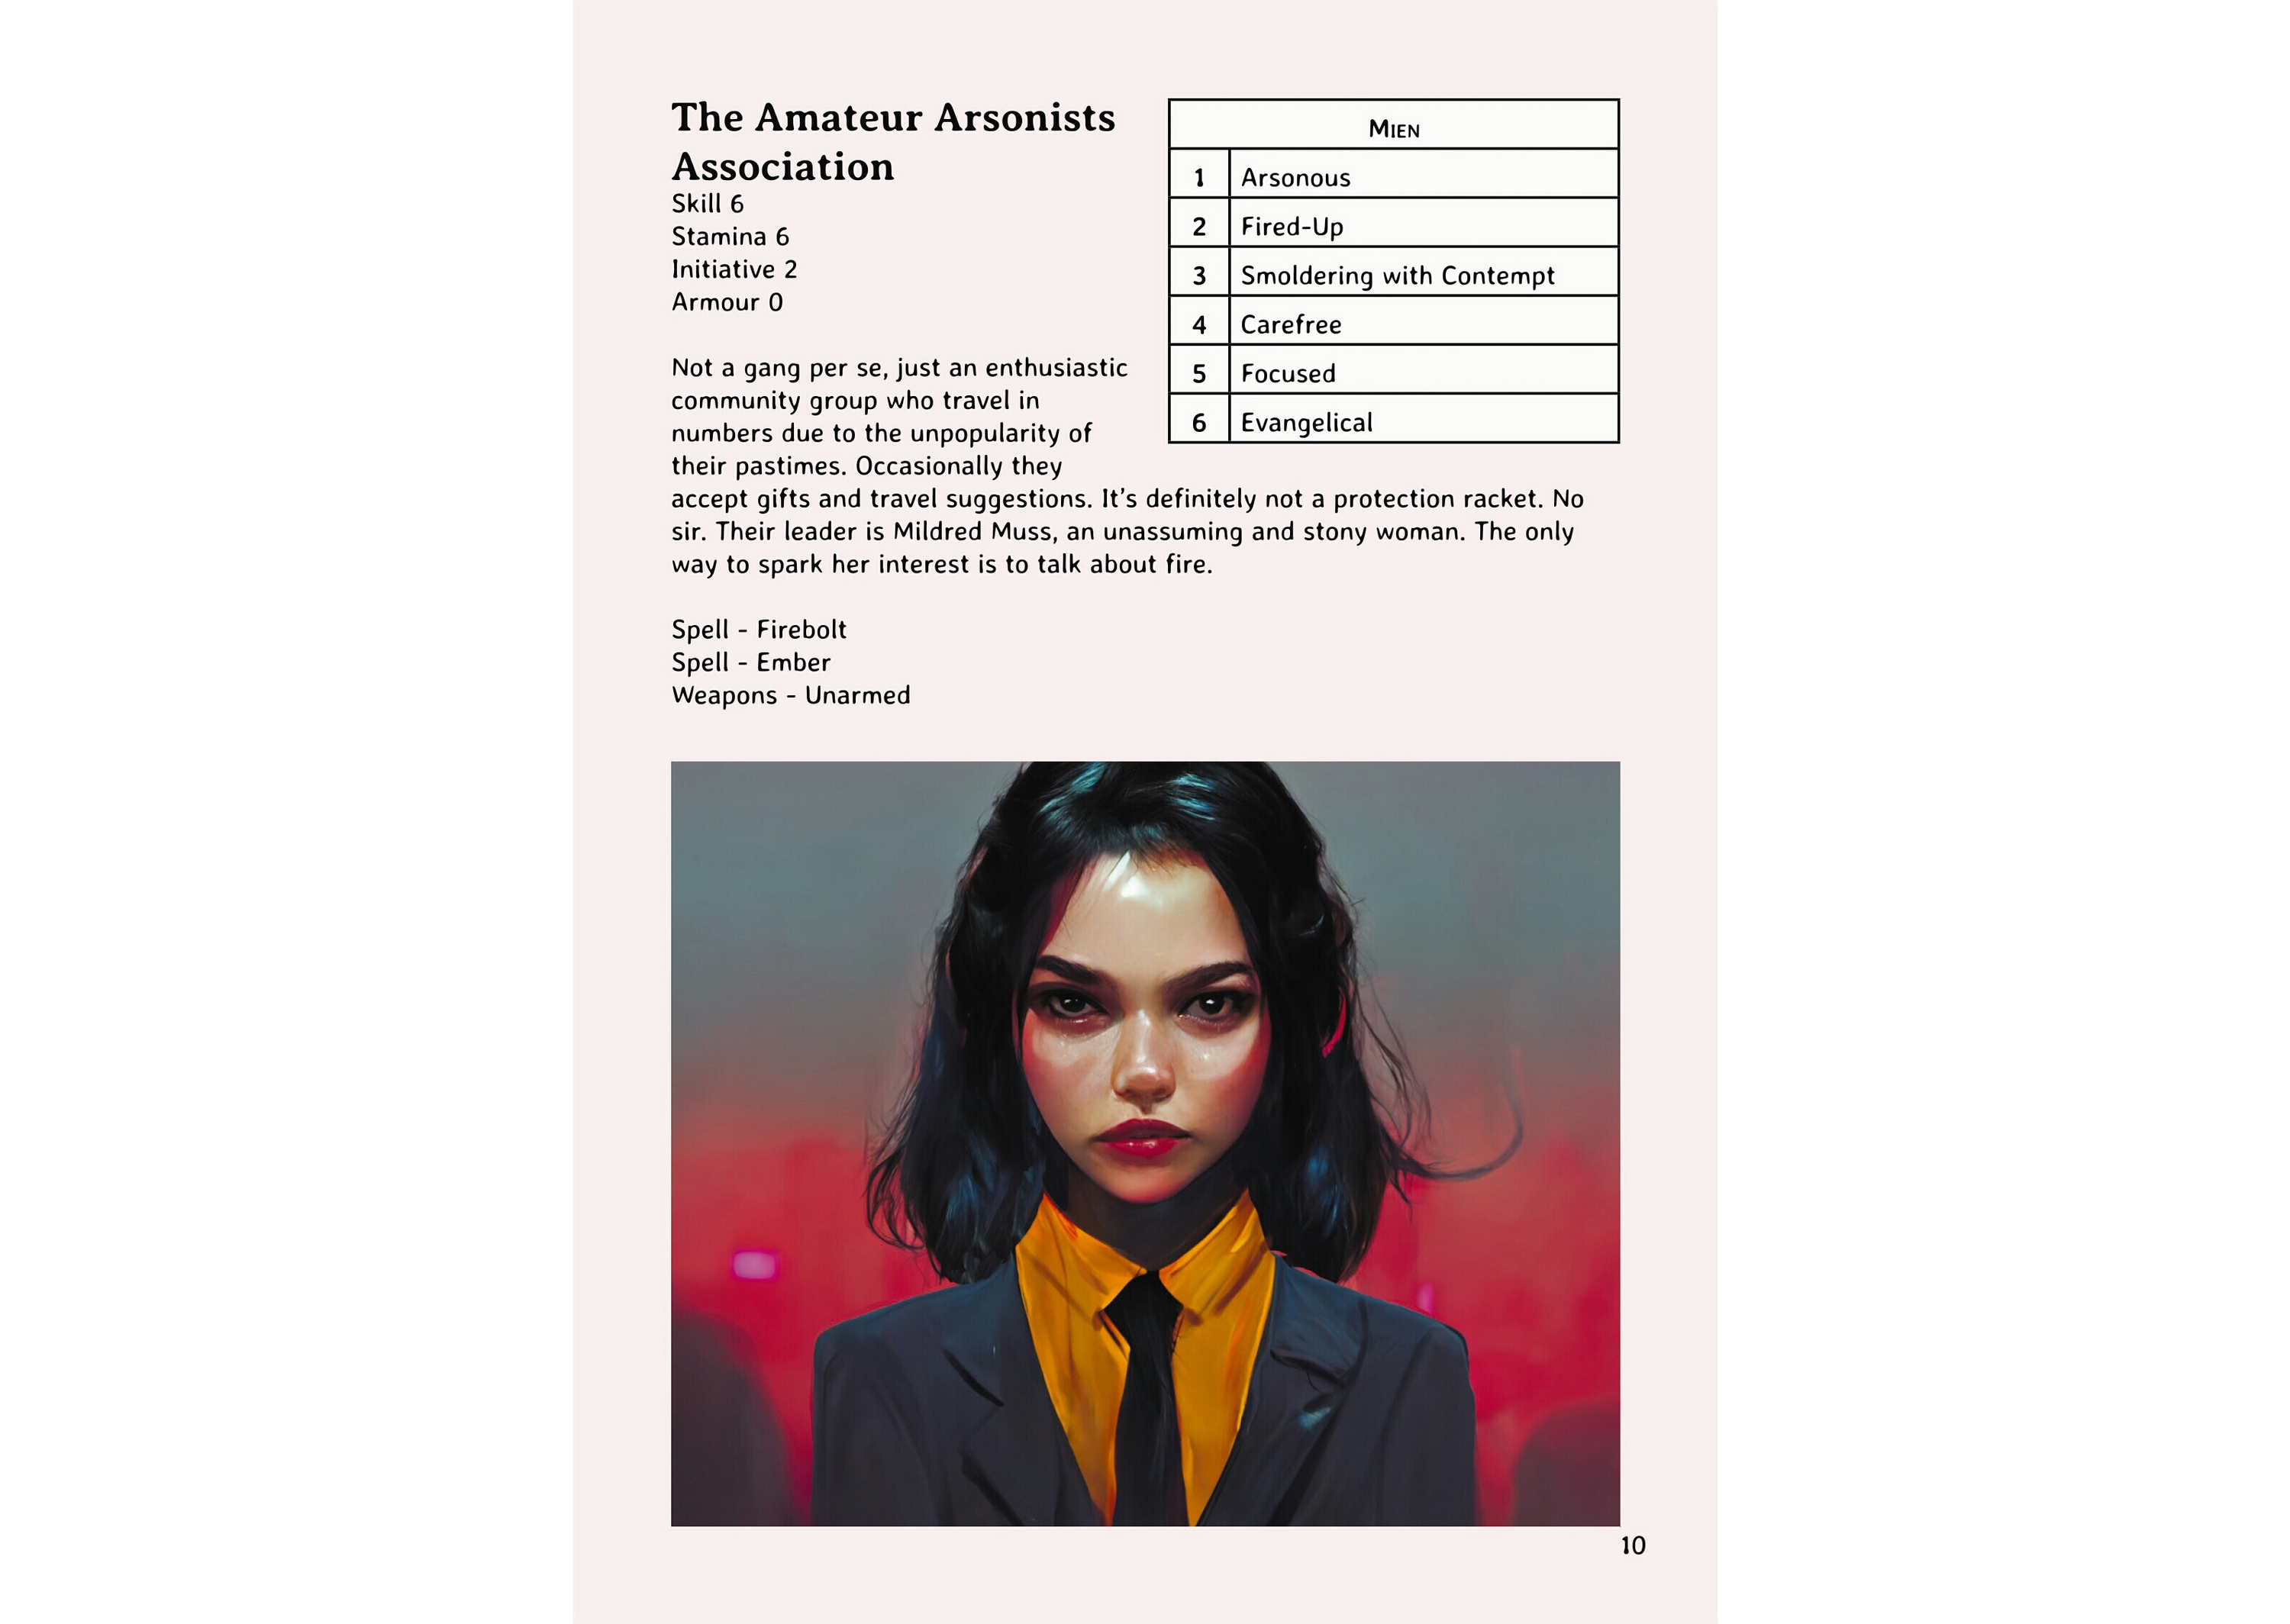 The top half of the page contains the mien table and description of the Amateur Arsonists Association. The bottom half of the page has a Midjourney portrait of a young woman with long black hair in business attire against a red gradient background.